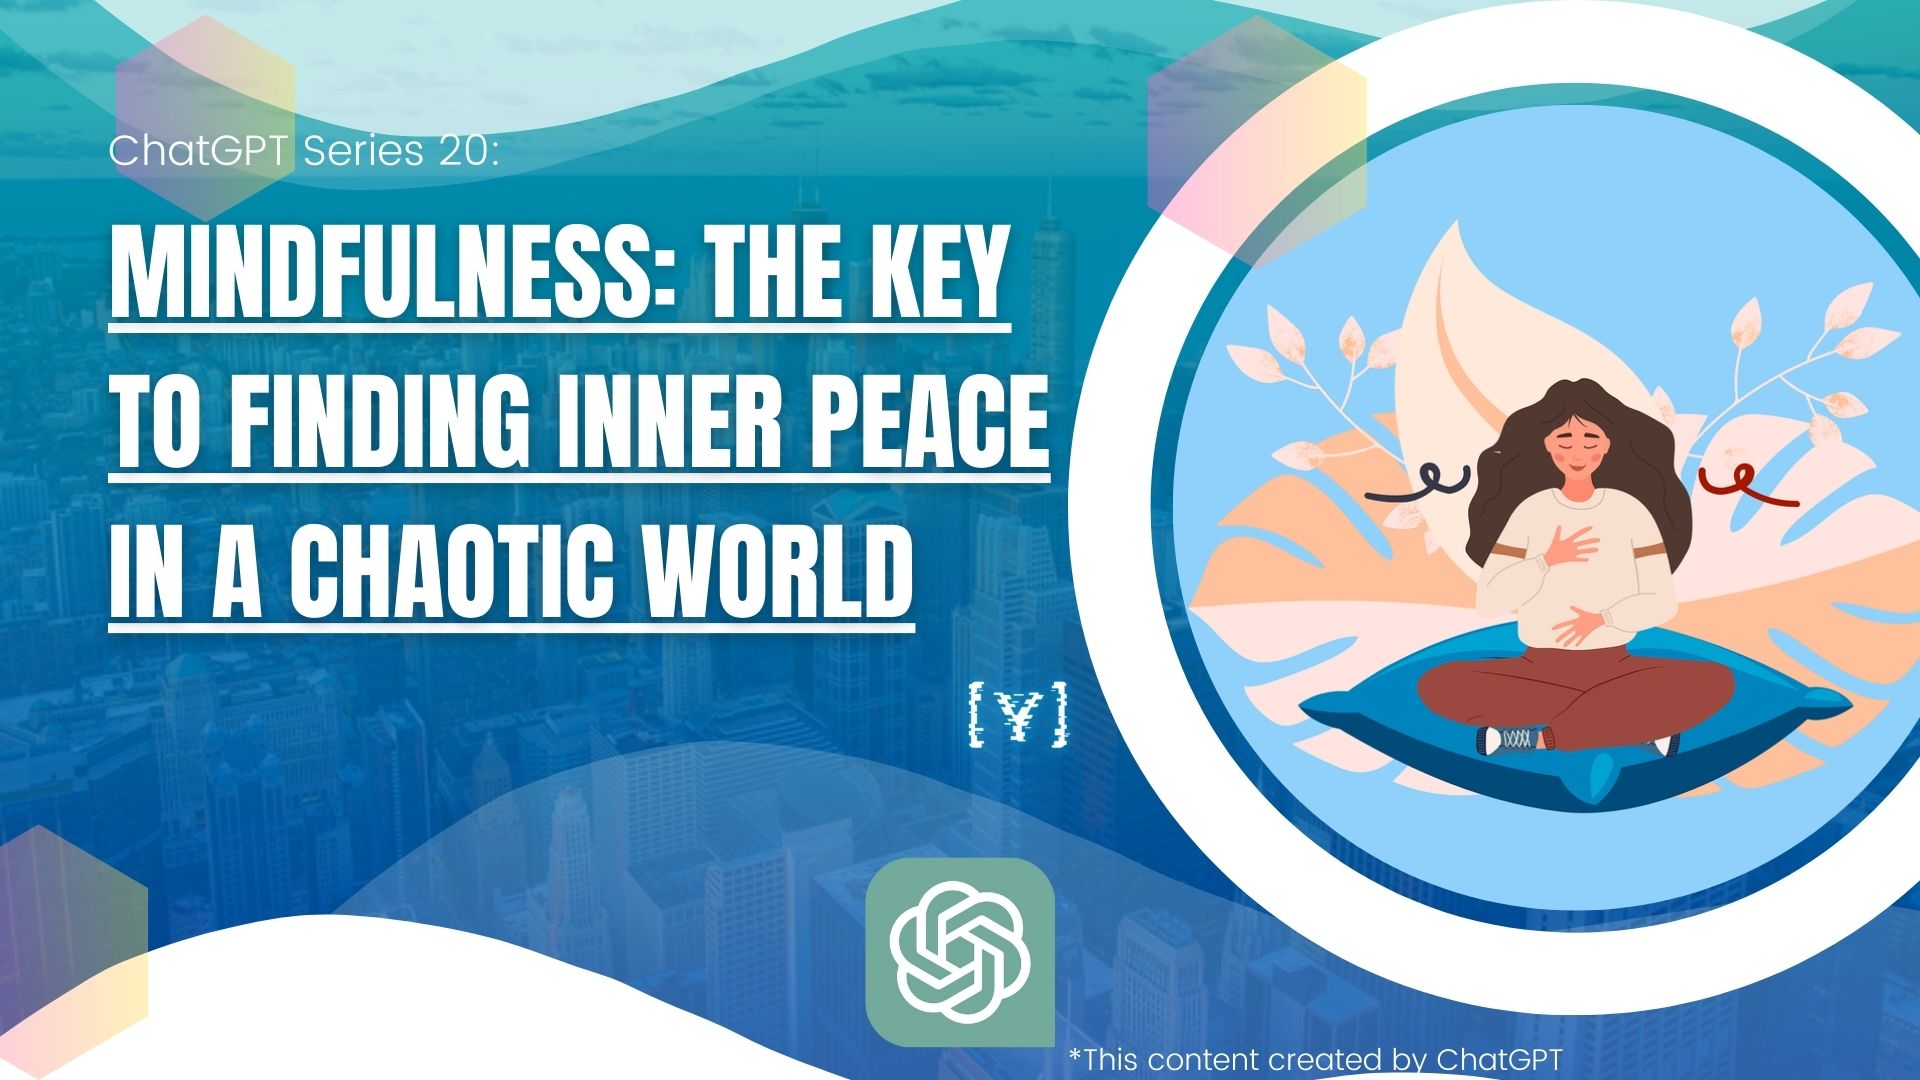 Mindfulness: The Key to Finding Inner Peace in a Chaotic World